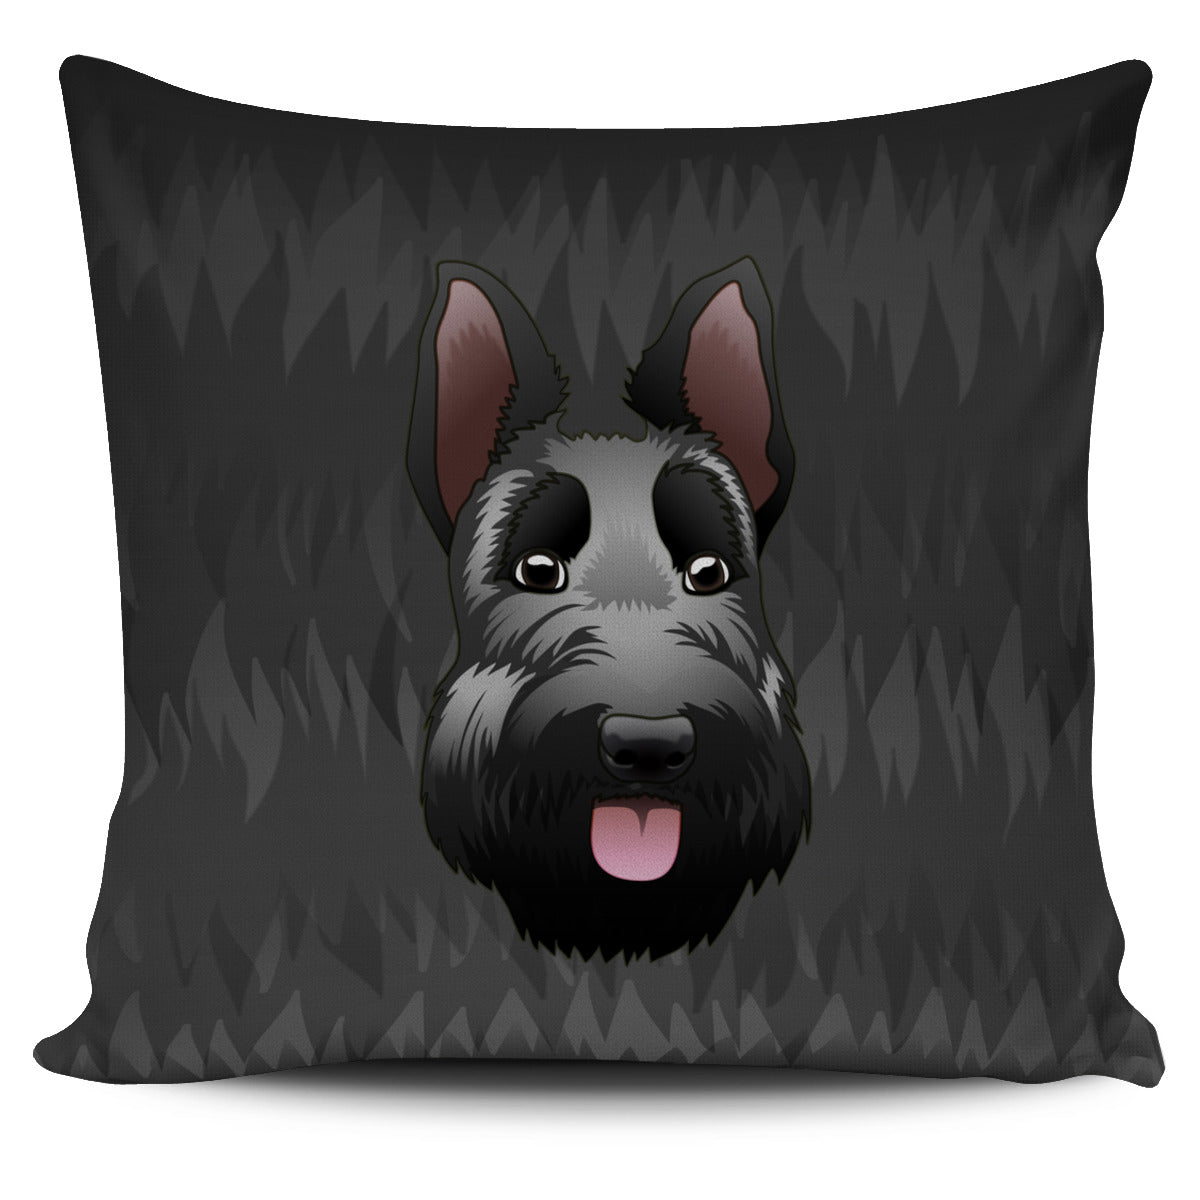 Real Scottish Terrier Pillow Cover